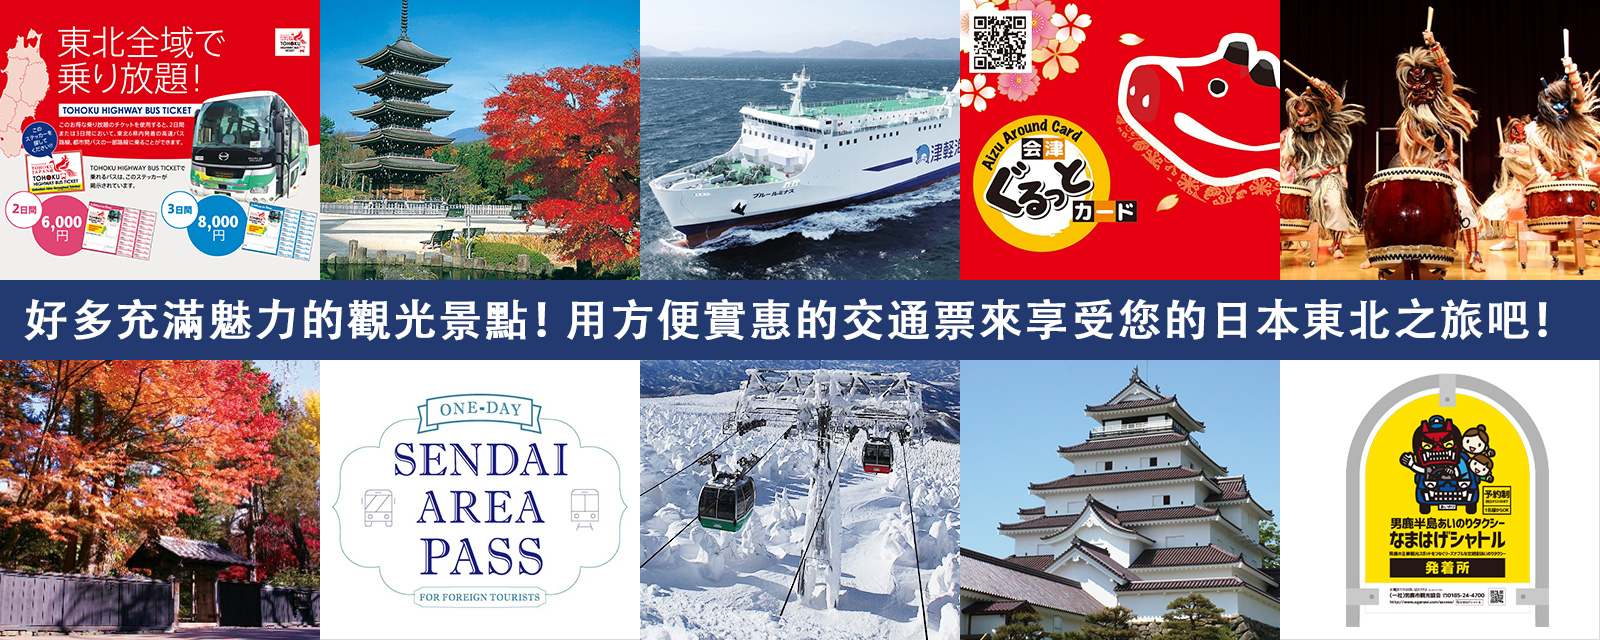 A lot of attractions! Use the cheap and convenient tickets to have fun in Tohoku!